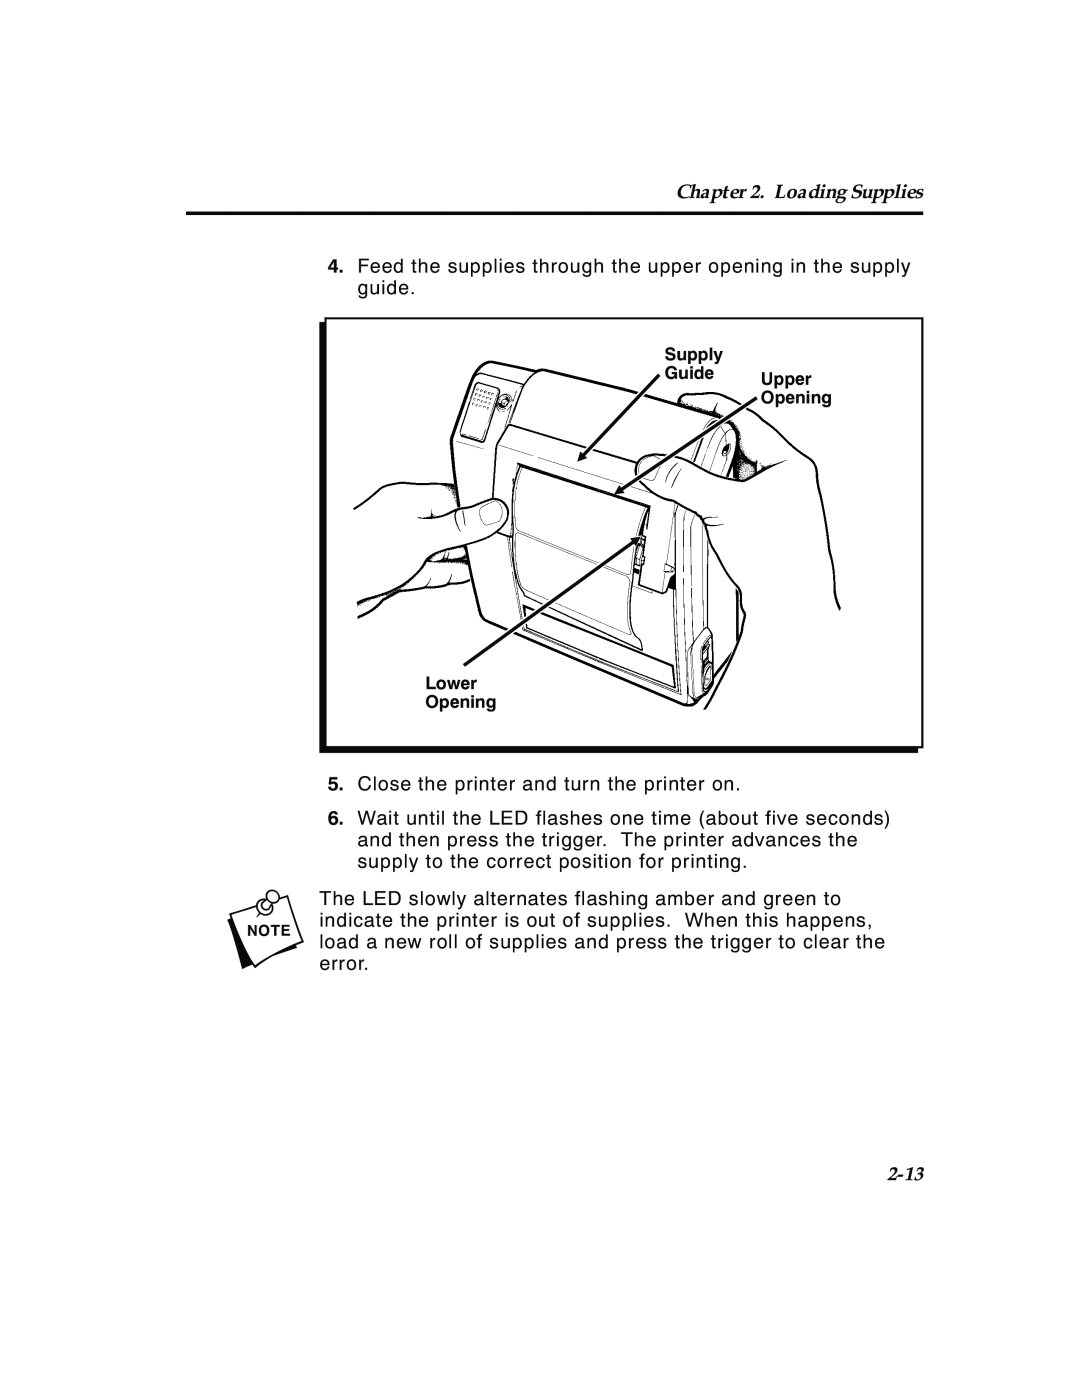 Paxar 4 manual 2-13, Loading Supplies, Supply Guide Upper Opening Lower Opening 